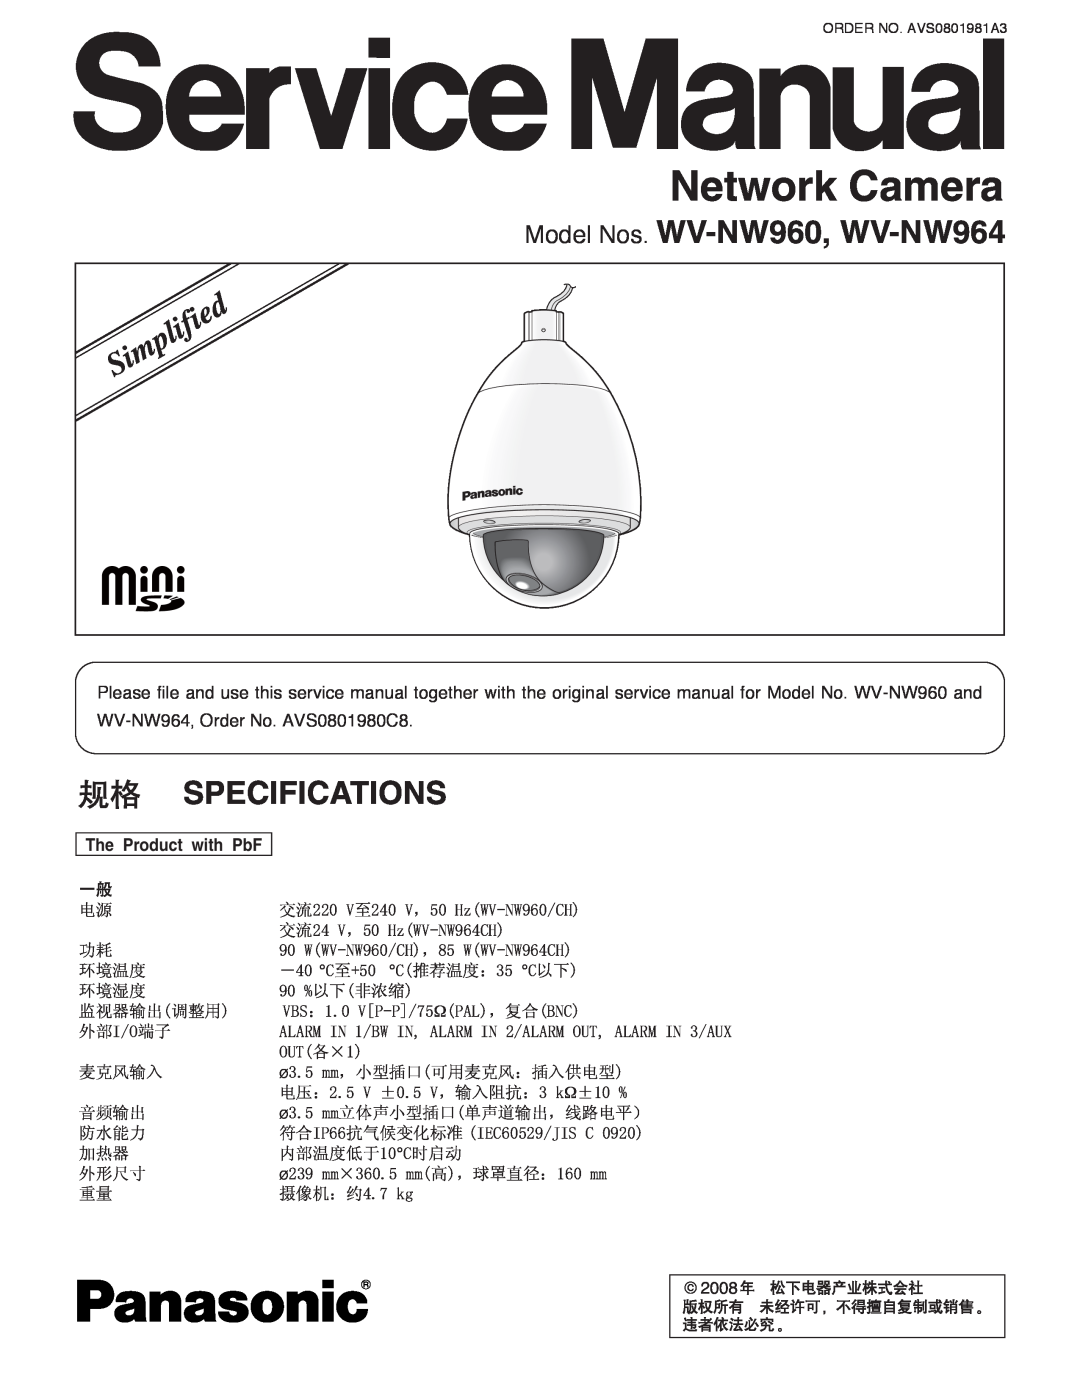 Panasonic specifications Model Nos. WV-NW960, WV-NW964, Specifications, The Product with PbF, Network Camera 